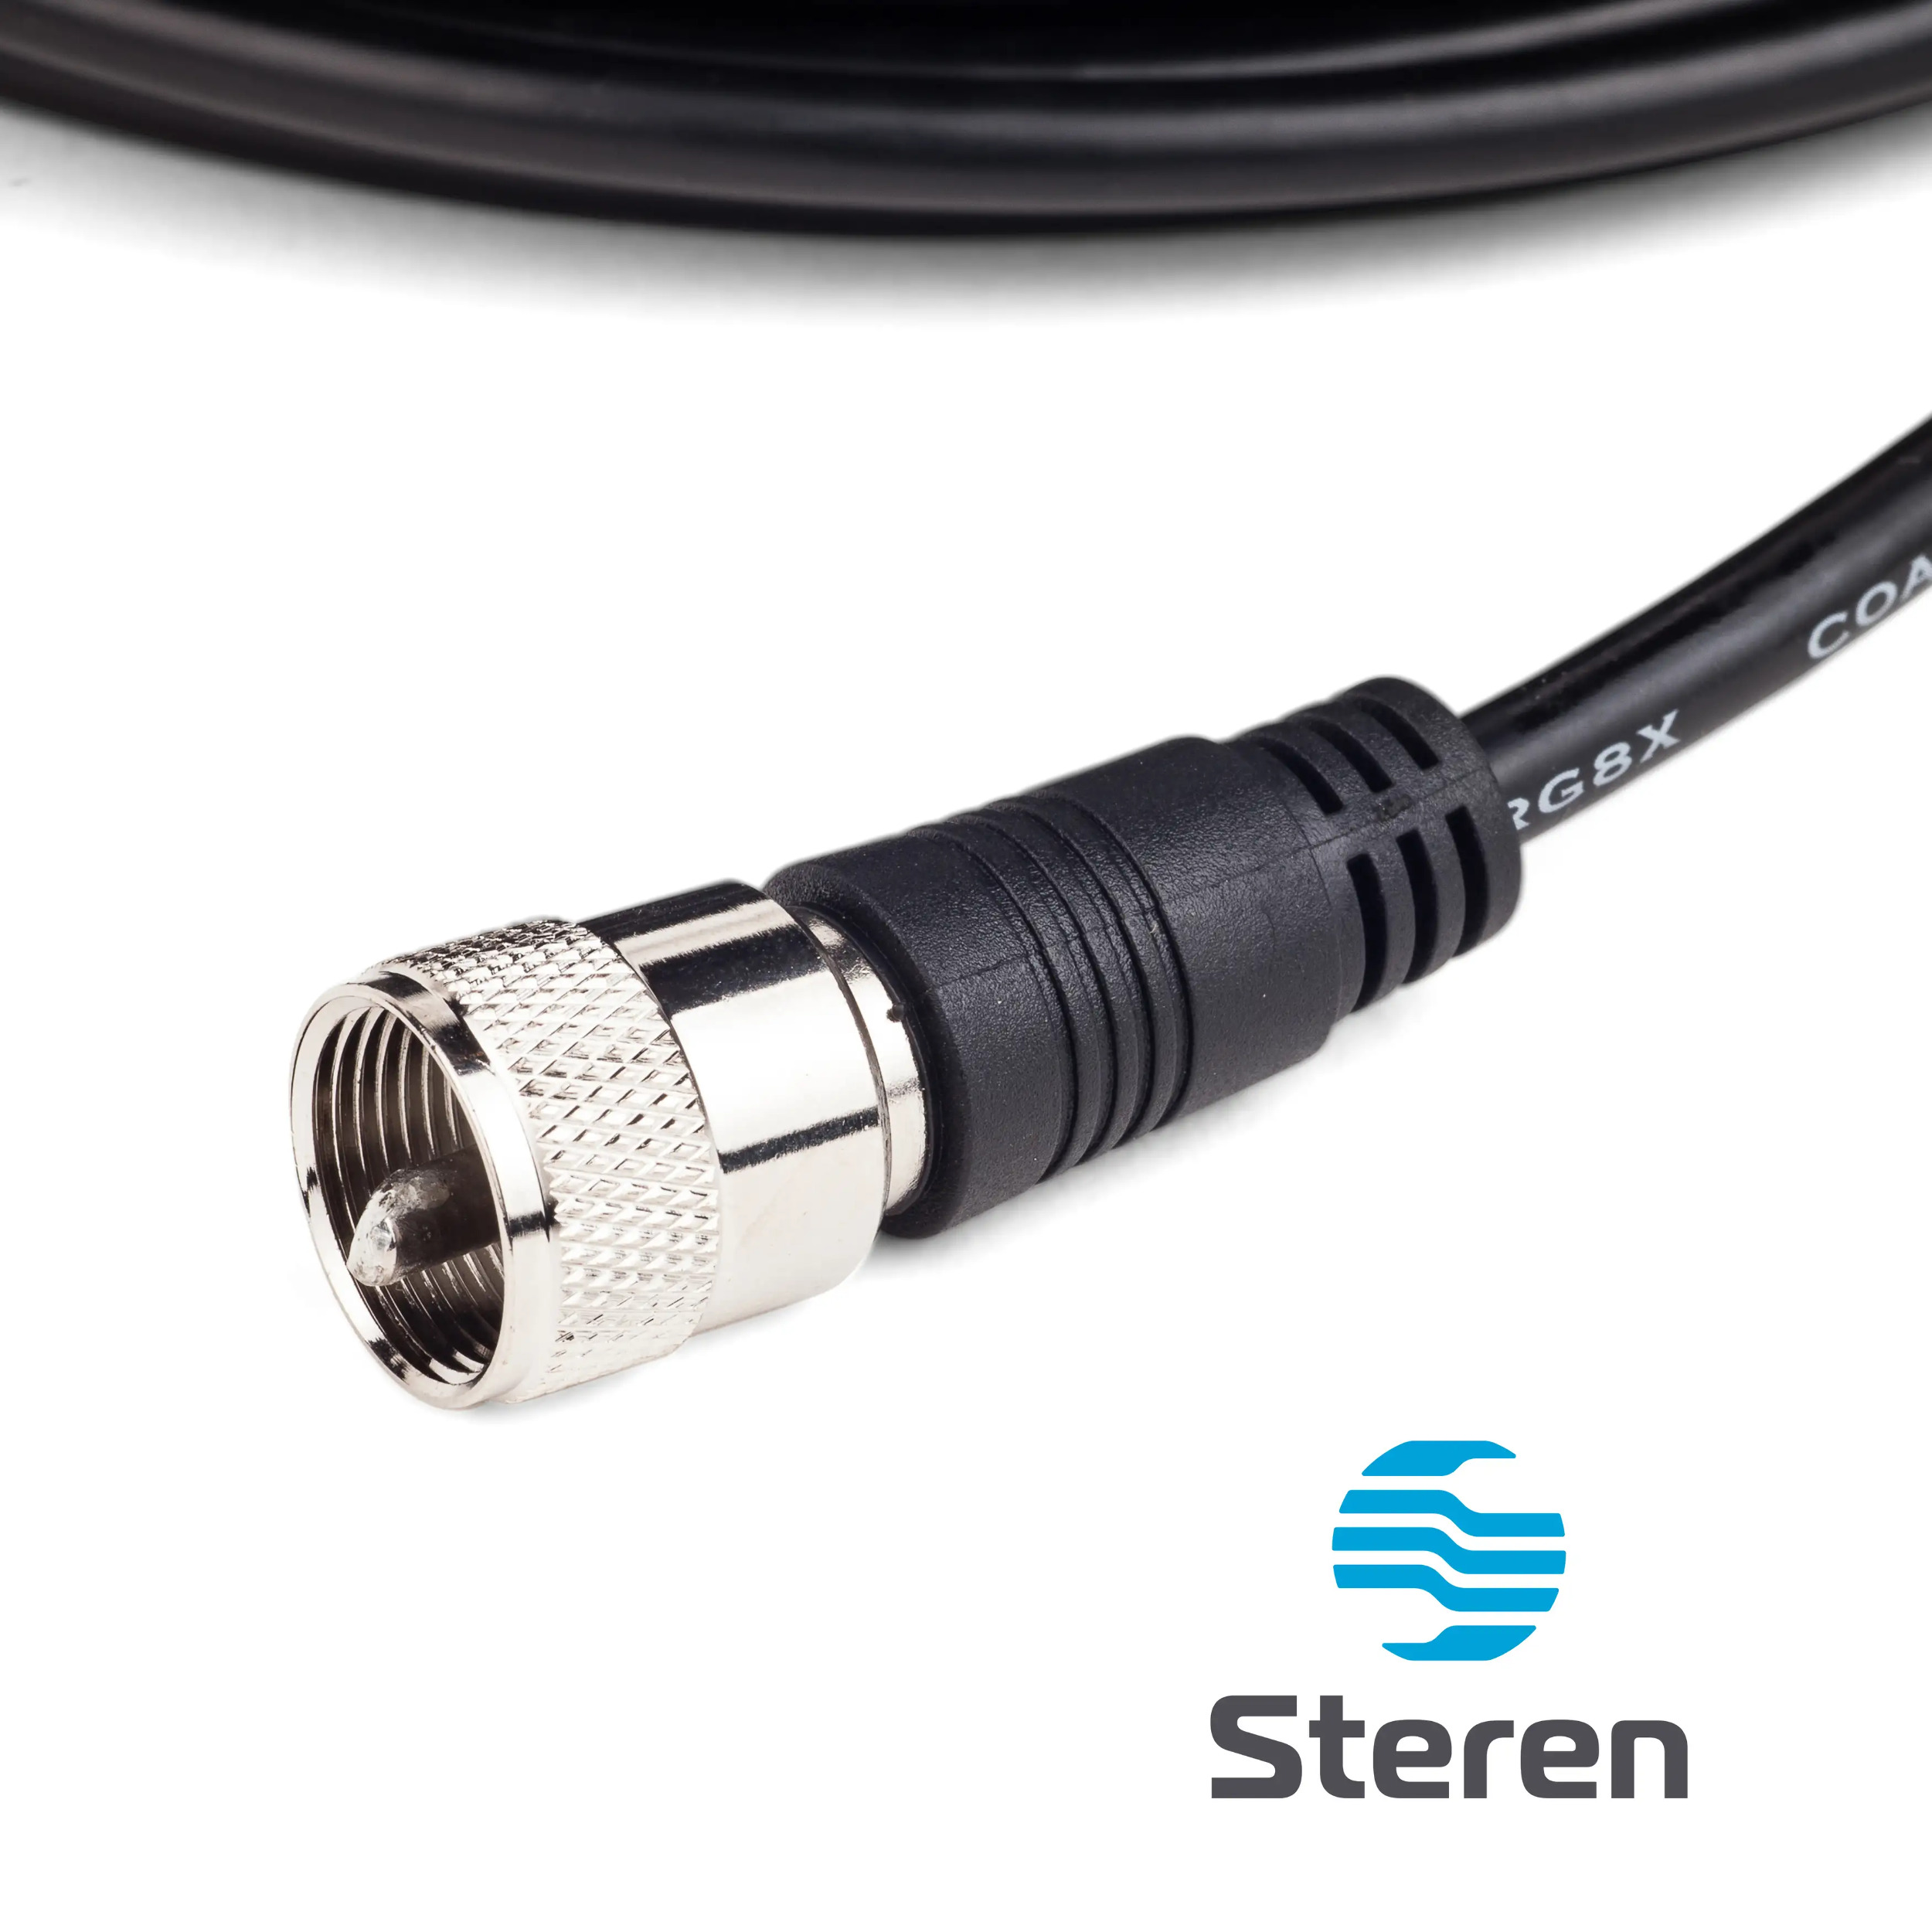 Steren 12ft UHF-UHF Mini-RG8x Cable - image 2 of 2